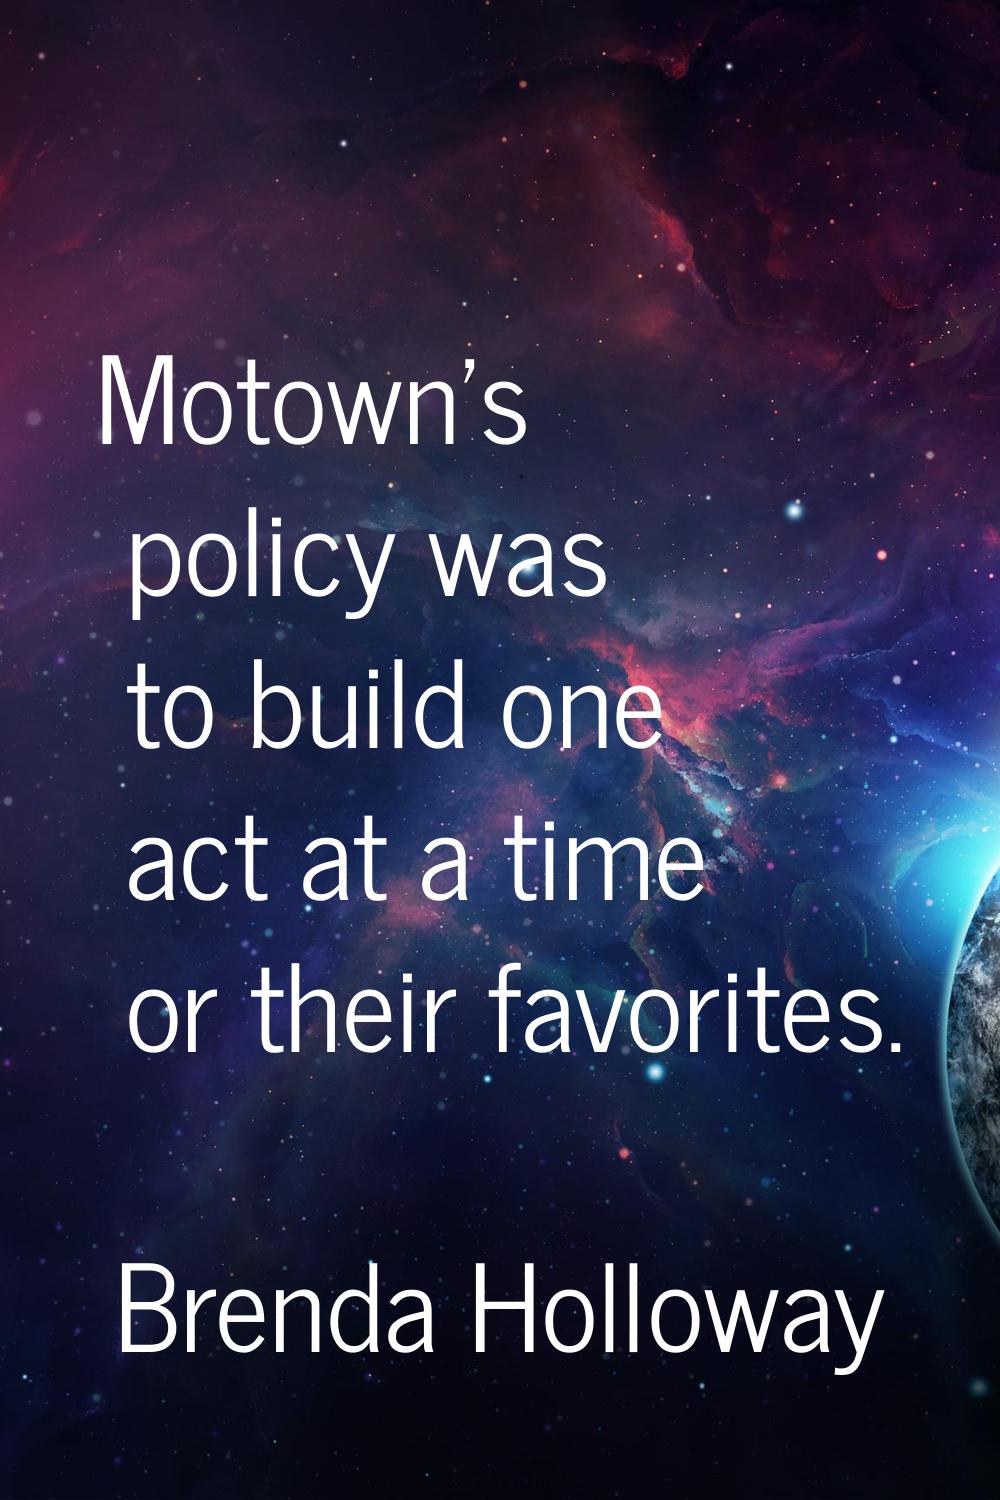 Motown's policy was to build one act at a time or their favorites.